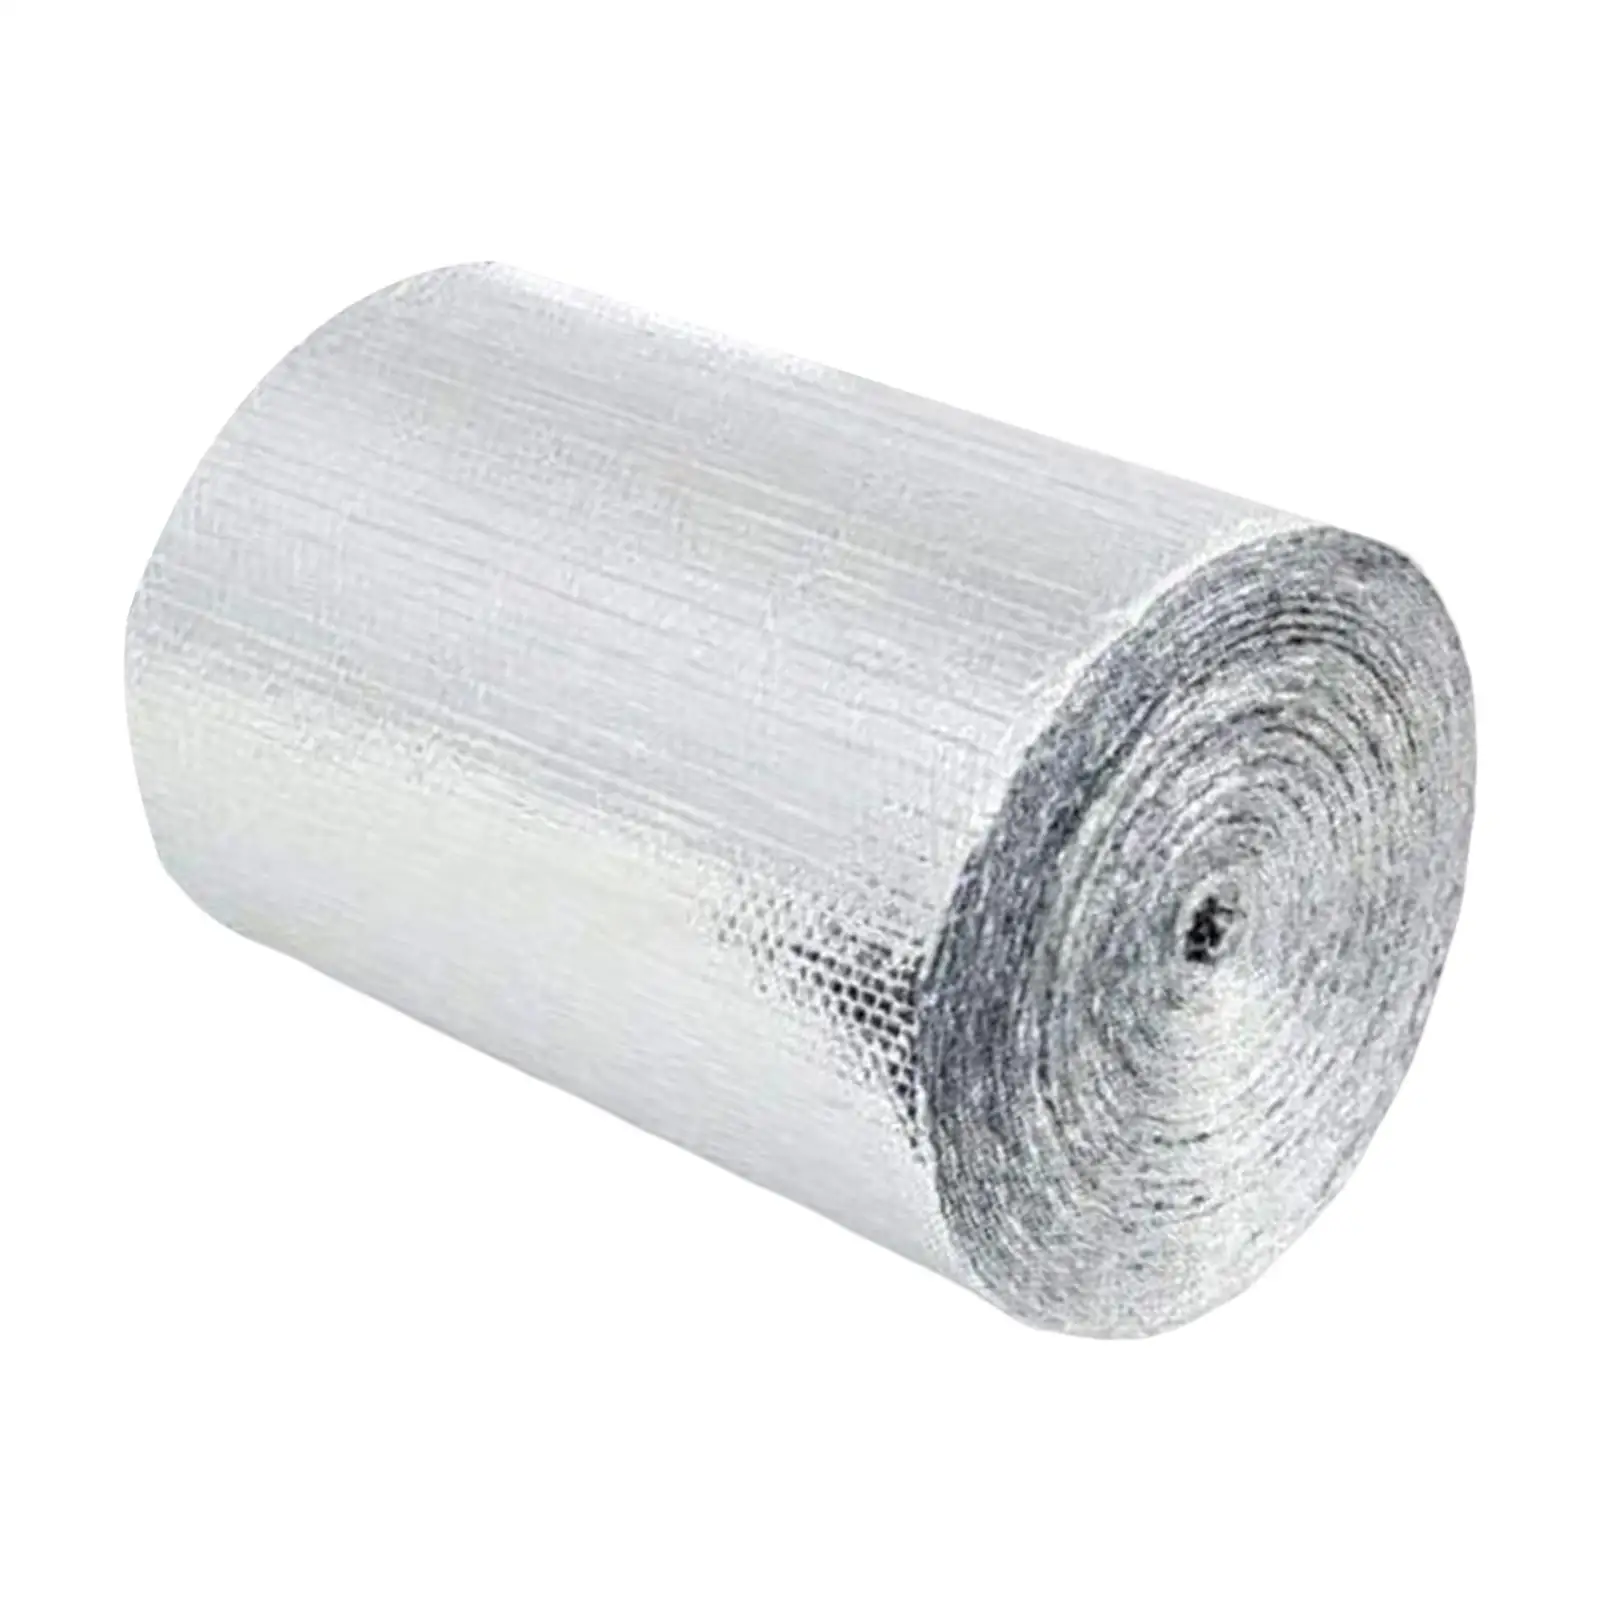 Insulation Aluminized Film Reliable Shockproof  Wear Resistant Waterproof Aluminized Film for Greenhouse Attic Windows Building